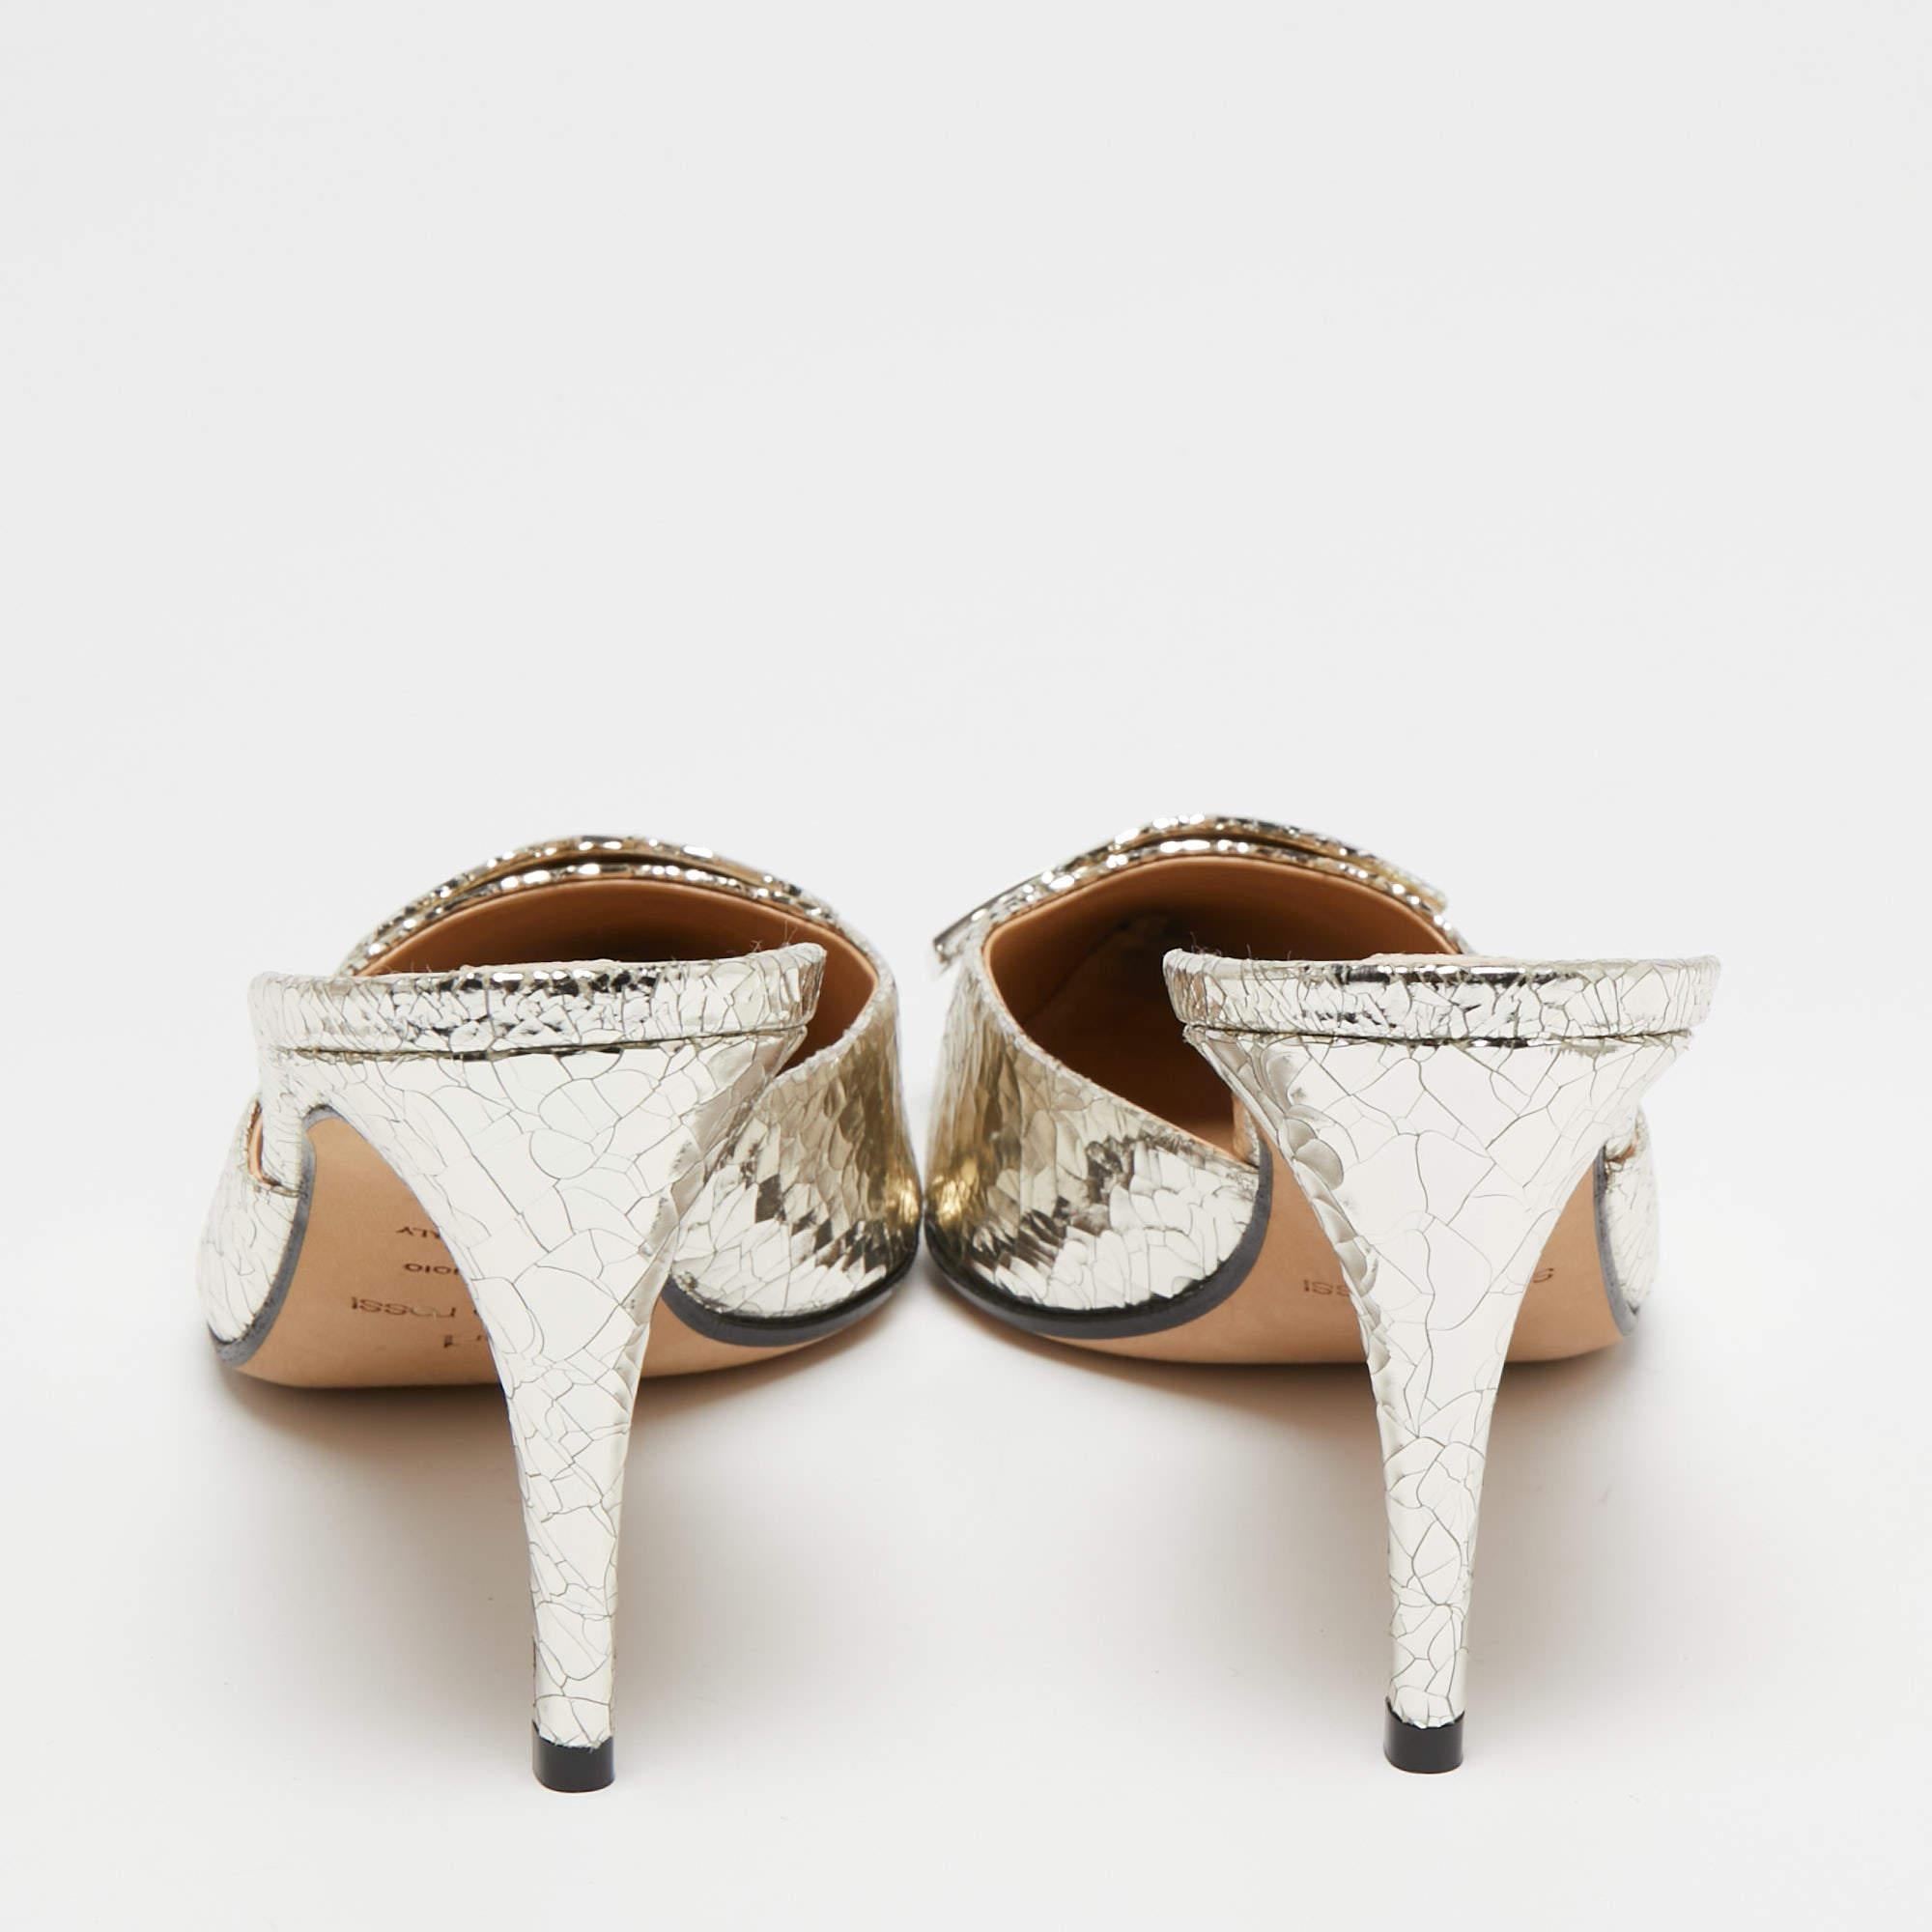 How pretty are these mules from Sergio Rossi! Fashioned in silver croc-embossed leather, these mules are elevated with silver-tone hardware. They are finished with pointed toes, slender heels, and a slip-on style. Revamp your outfit with these